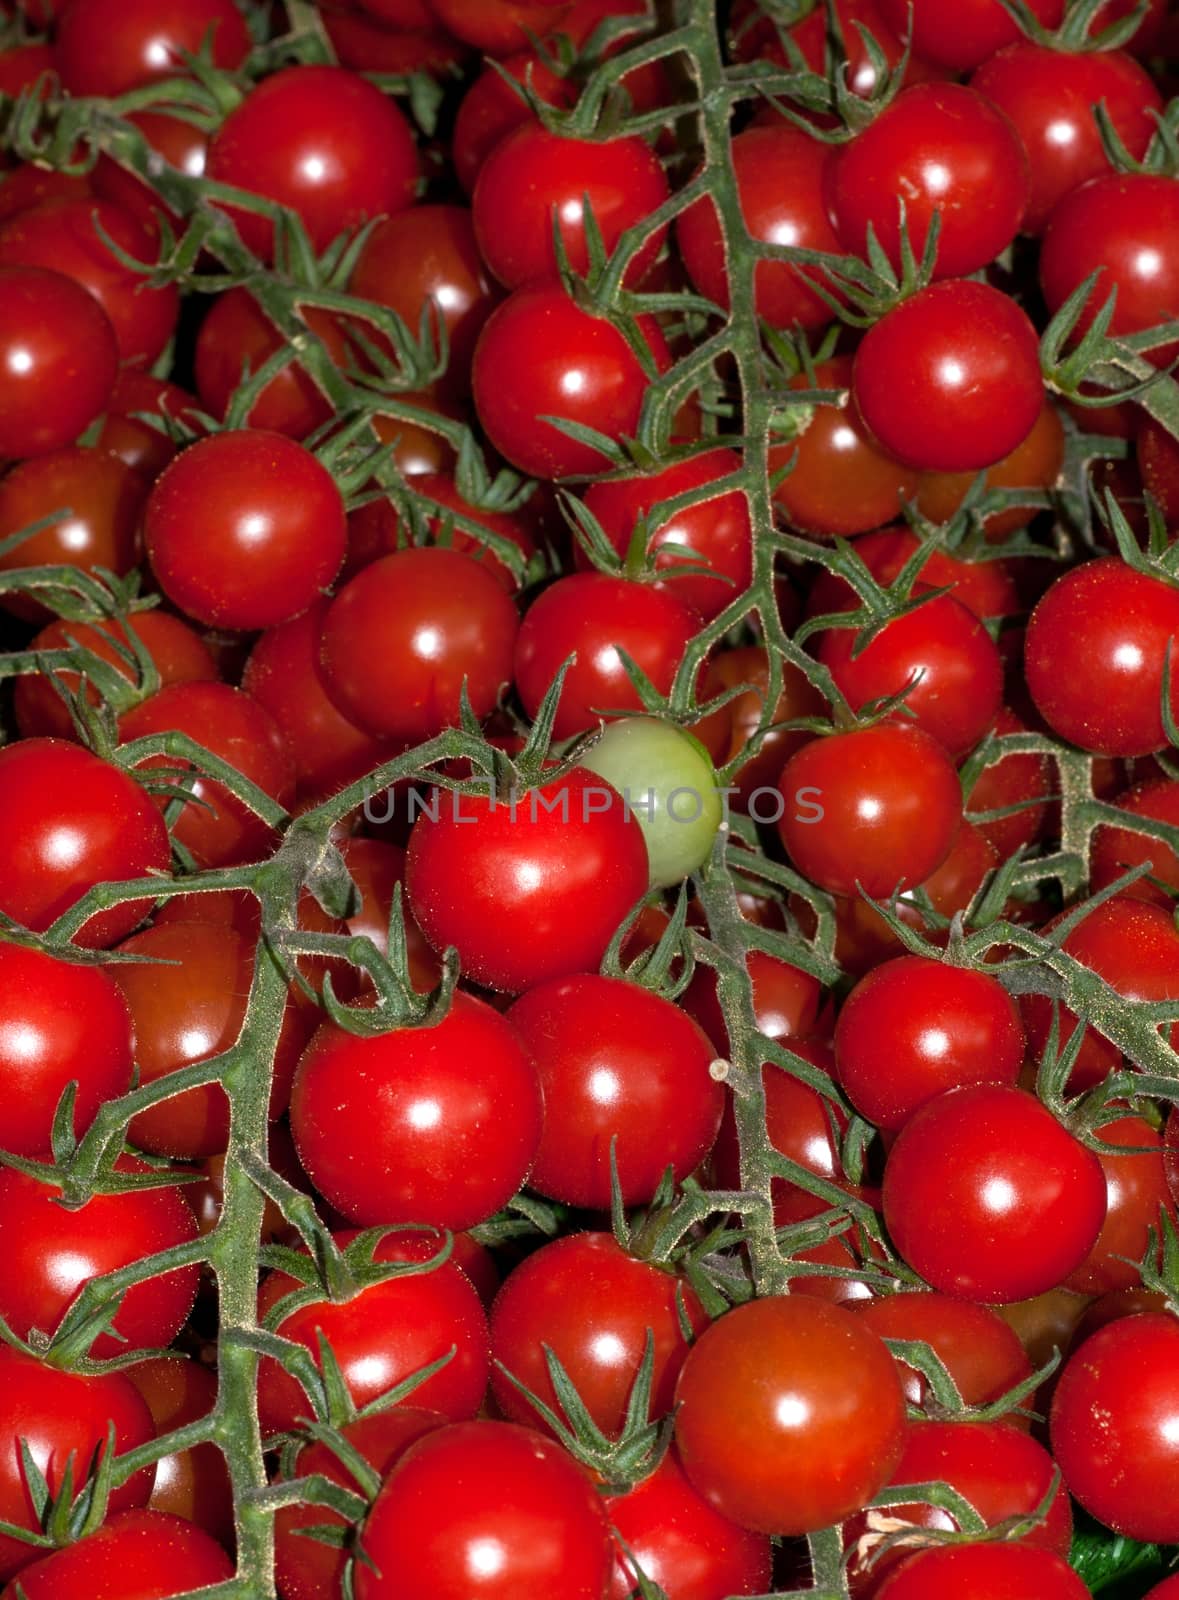 A collection of chrry tomatoes on the vine